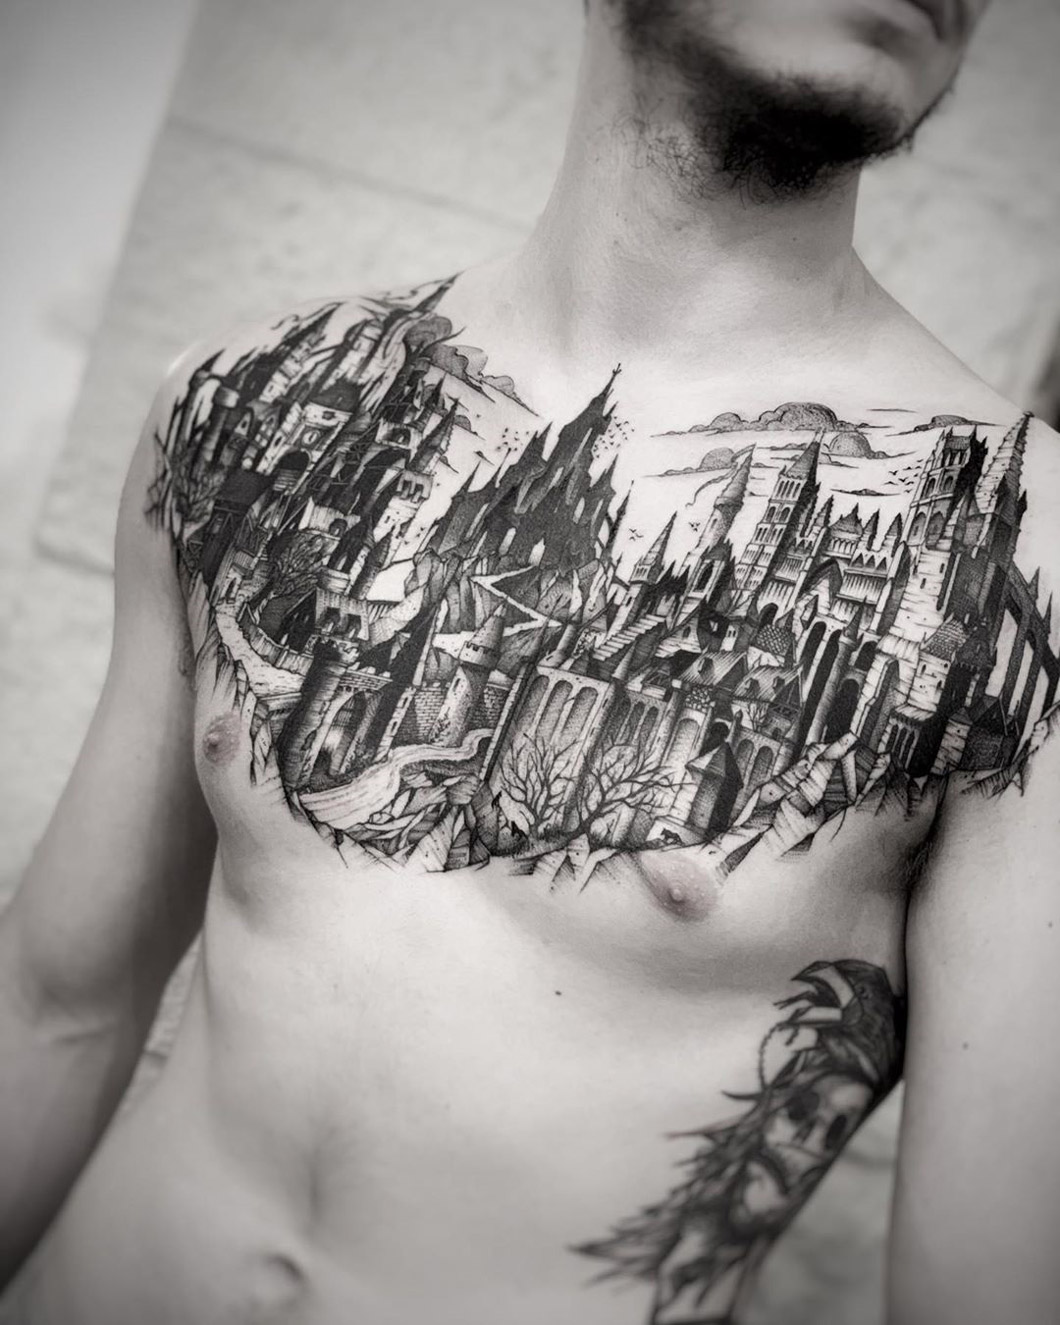 Share 92+ about castle chest tattoo latest .vn